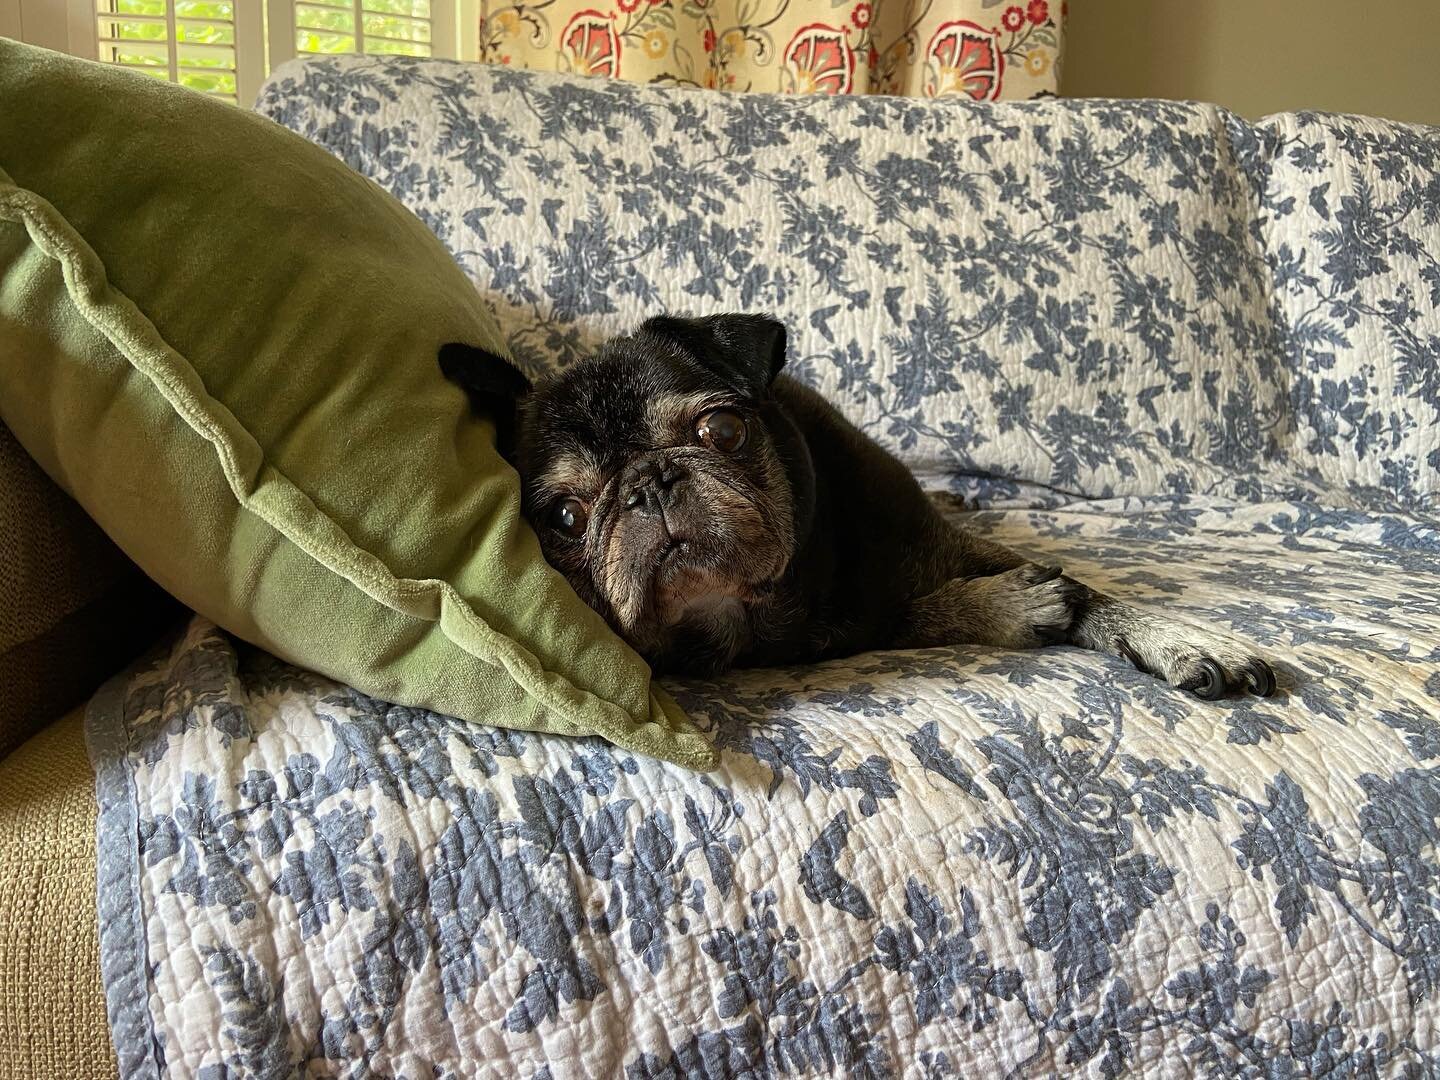 I am very sad to say that yesterday we had to say goodbye to our Holly pug. This has hit me extremely hard. She was always close and full of love these past 12 years. I am going to miss her terribly. #HollyPug